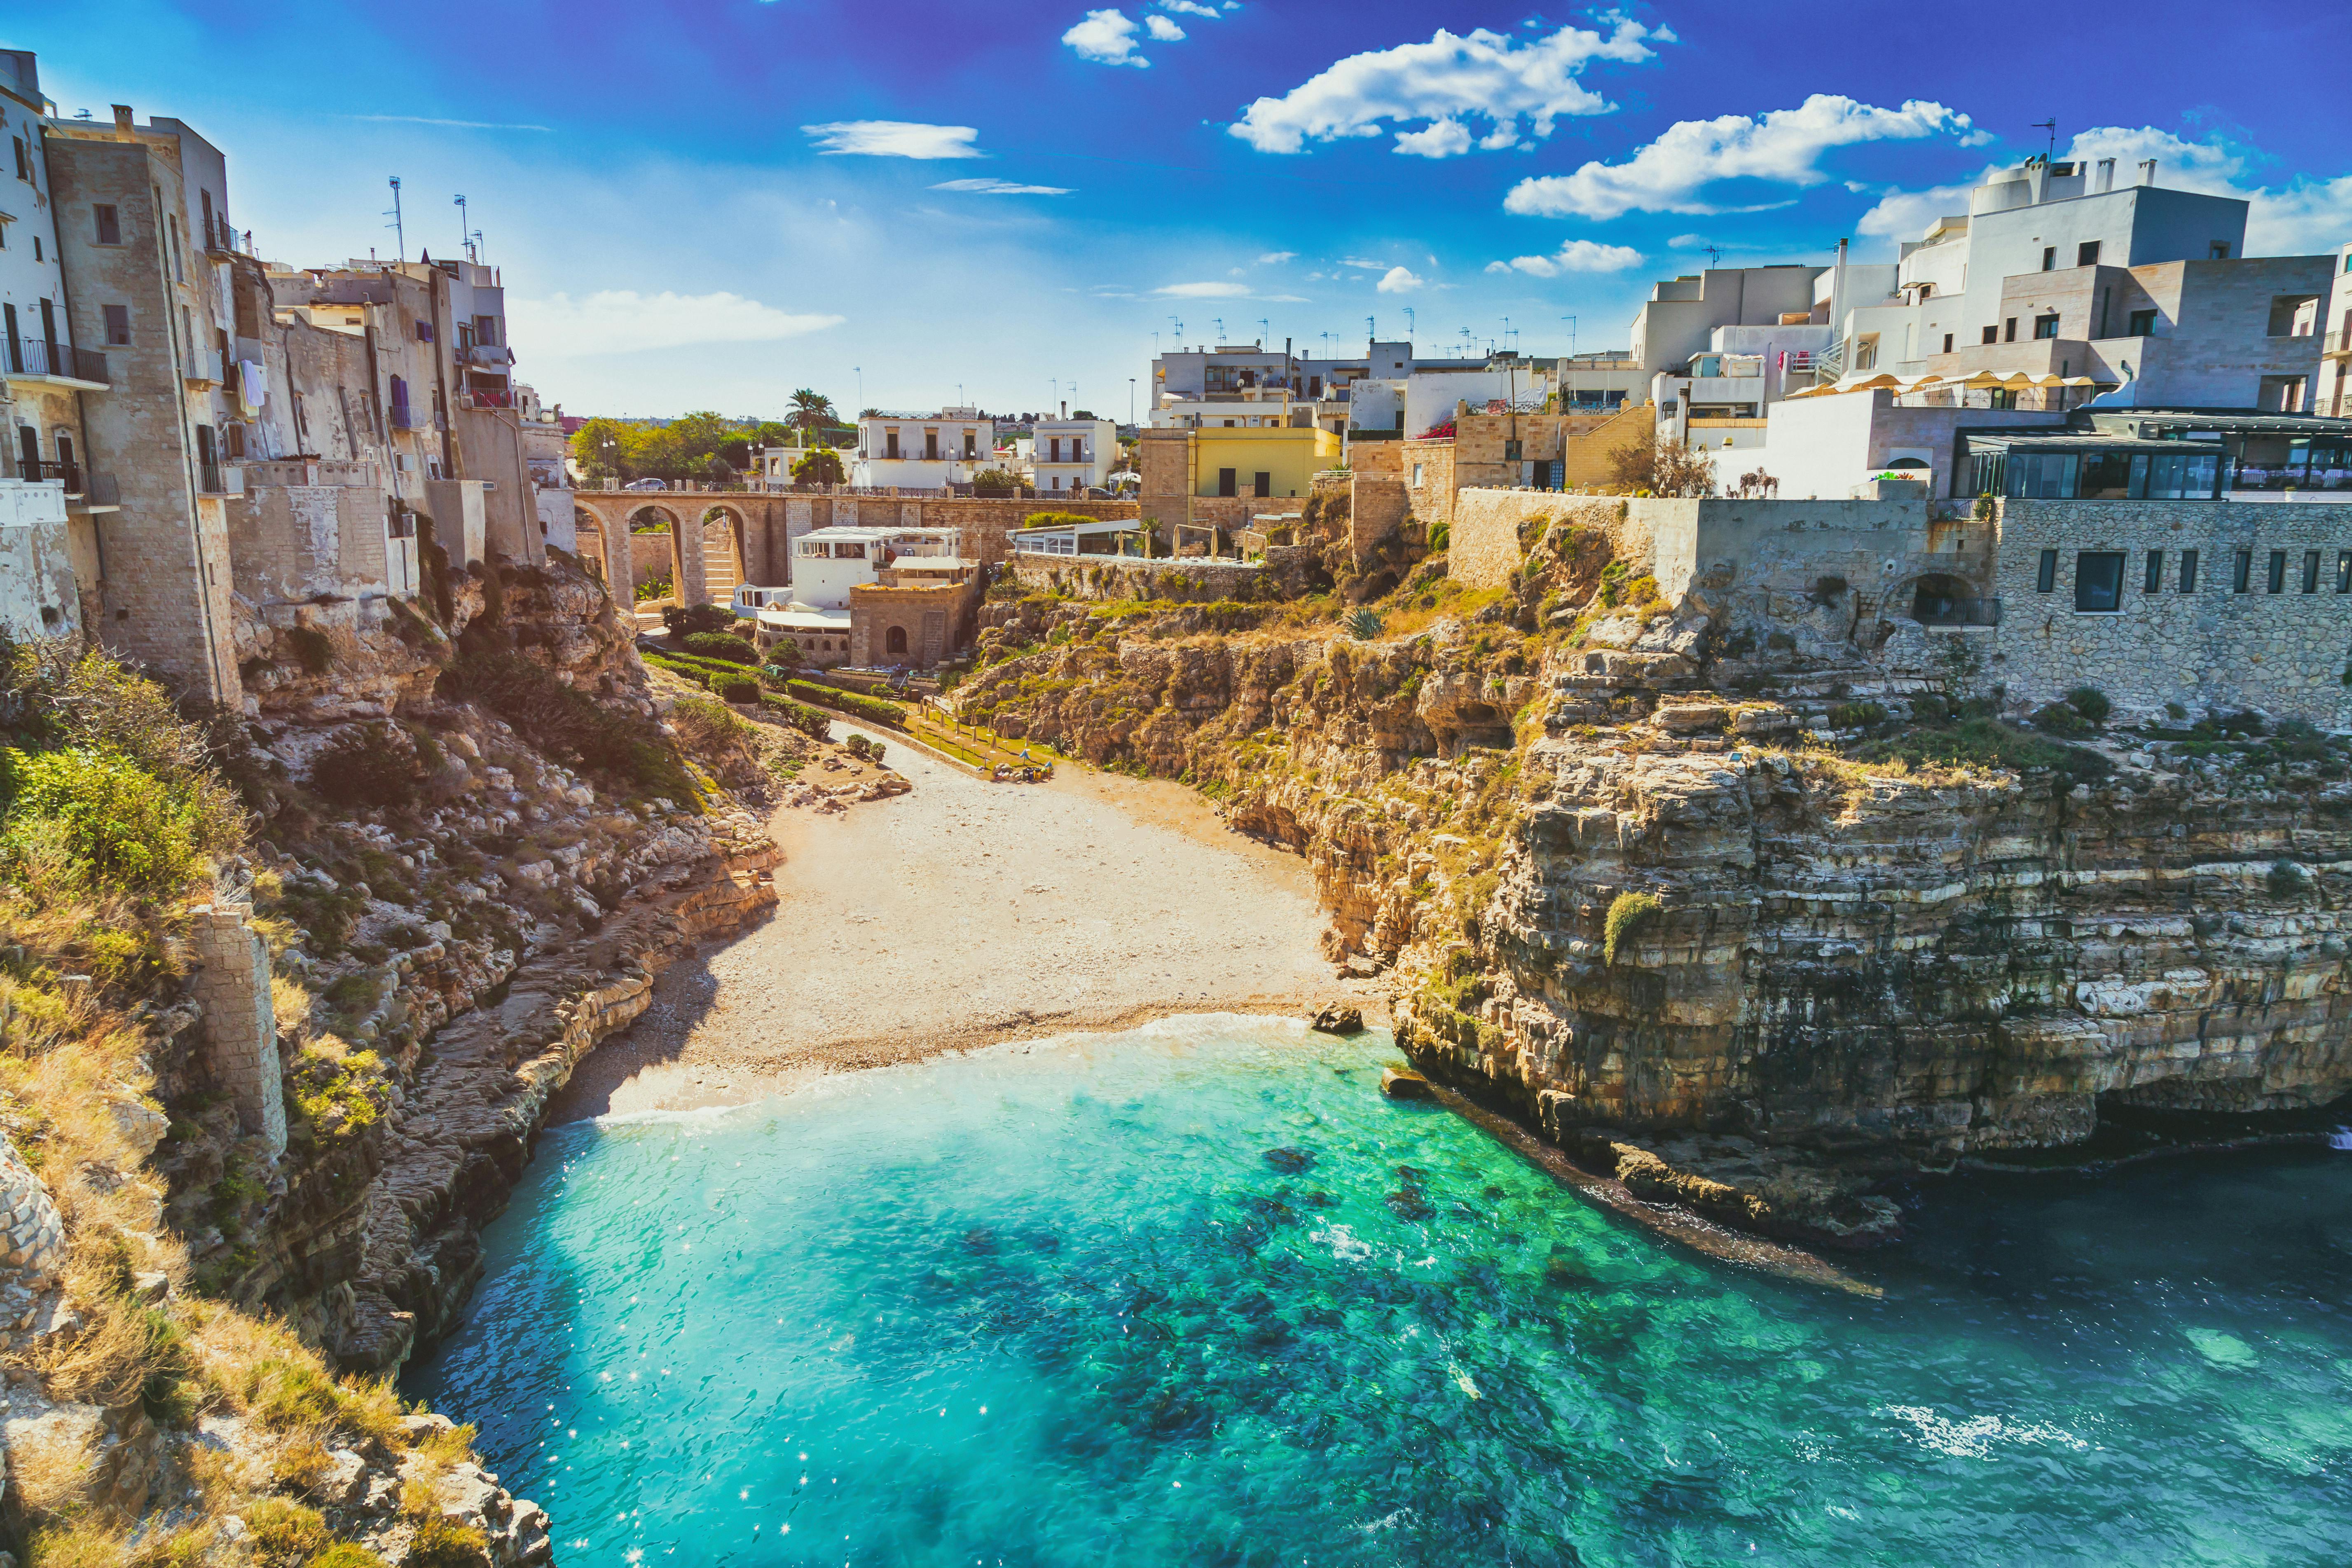 Polignano a Mare walking tour with an expert guide